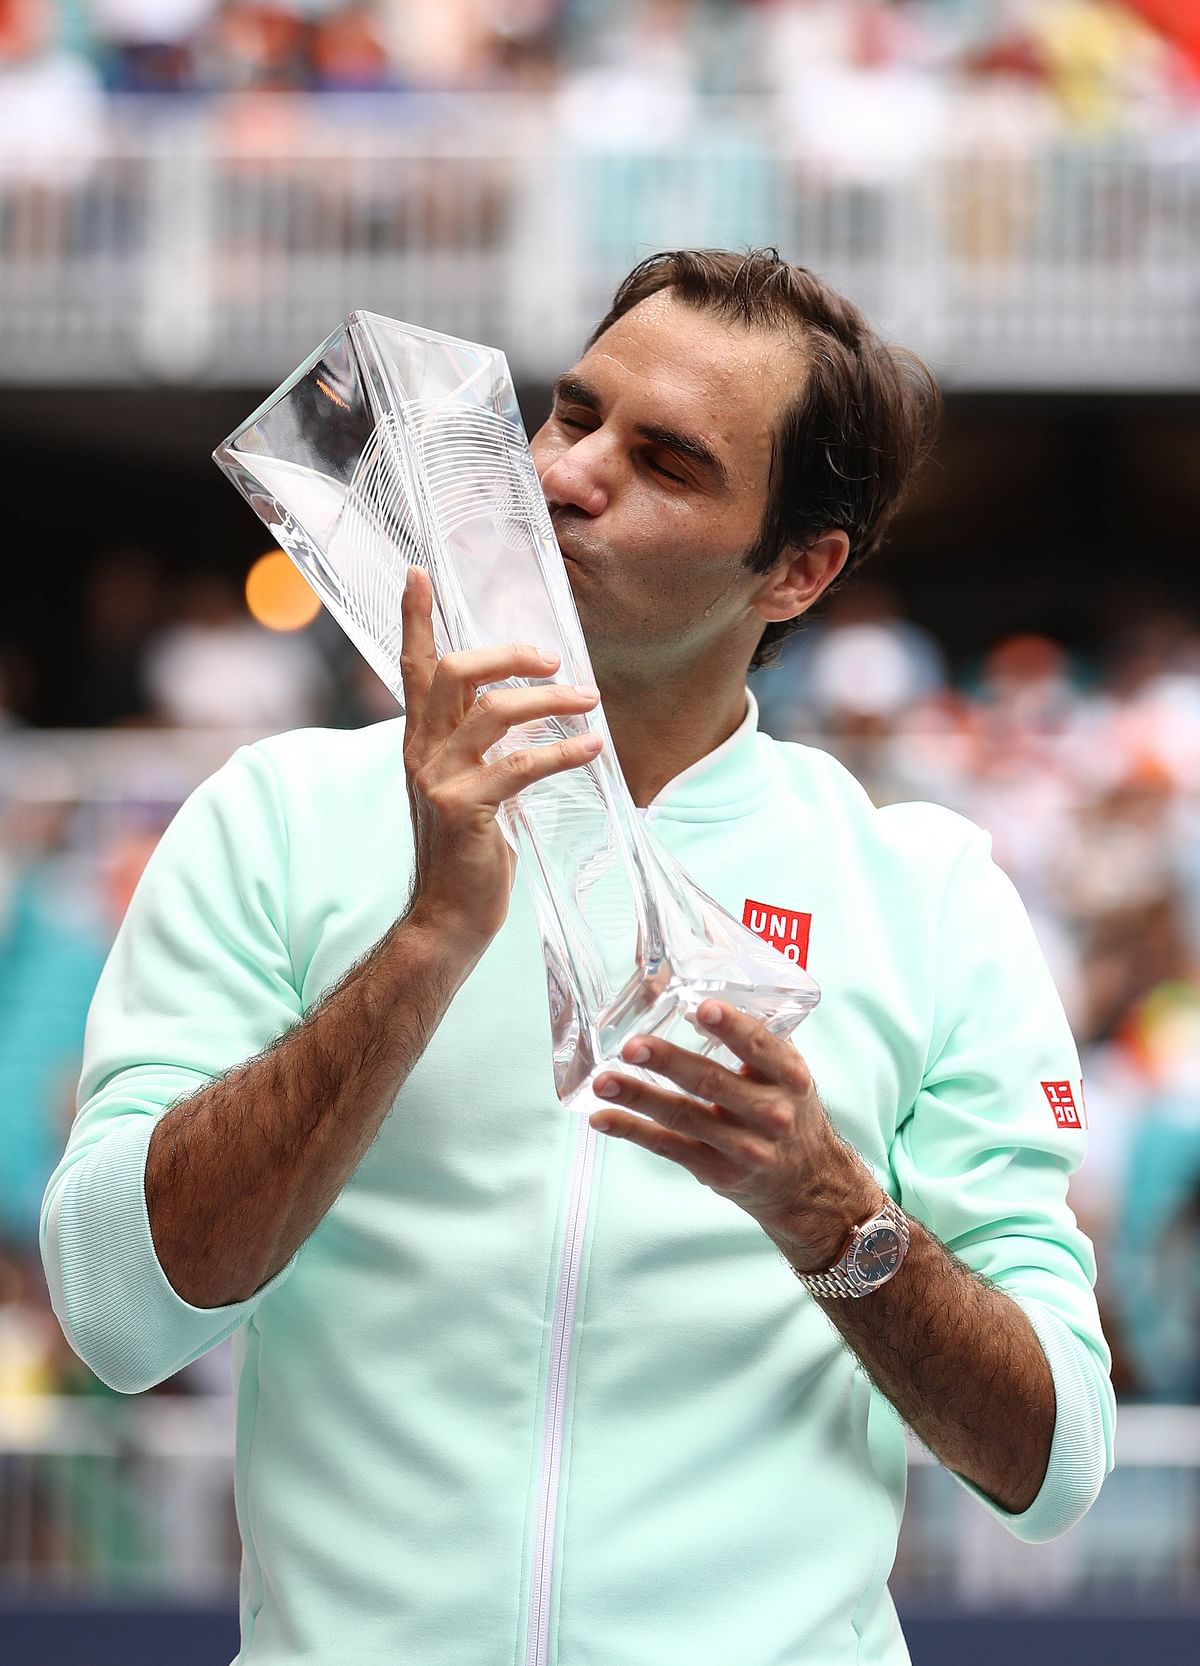 Roger Federer of Switzerland poses with the winners trophy after defeating John Isner in straight sets during the Men`s Final match on day 14 of the Miami Open presented by Itau at Hard Rock Stadium on 31 March 2019 in Miami Gardens, Florida. Photo: AFP